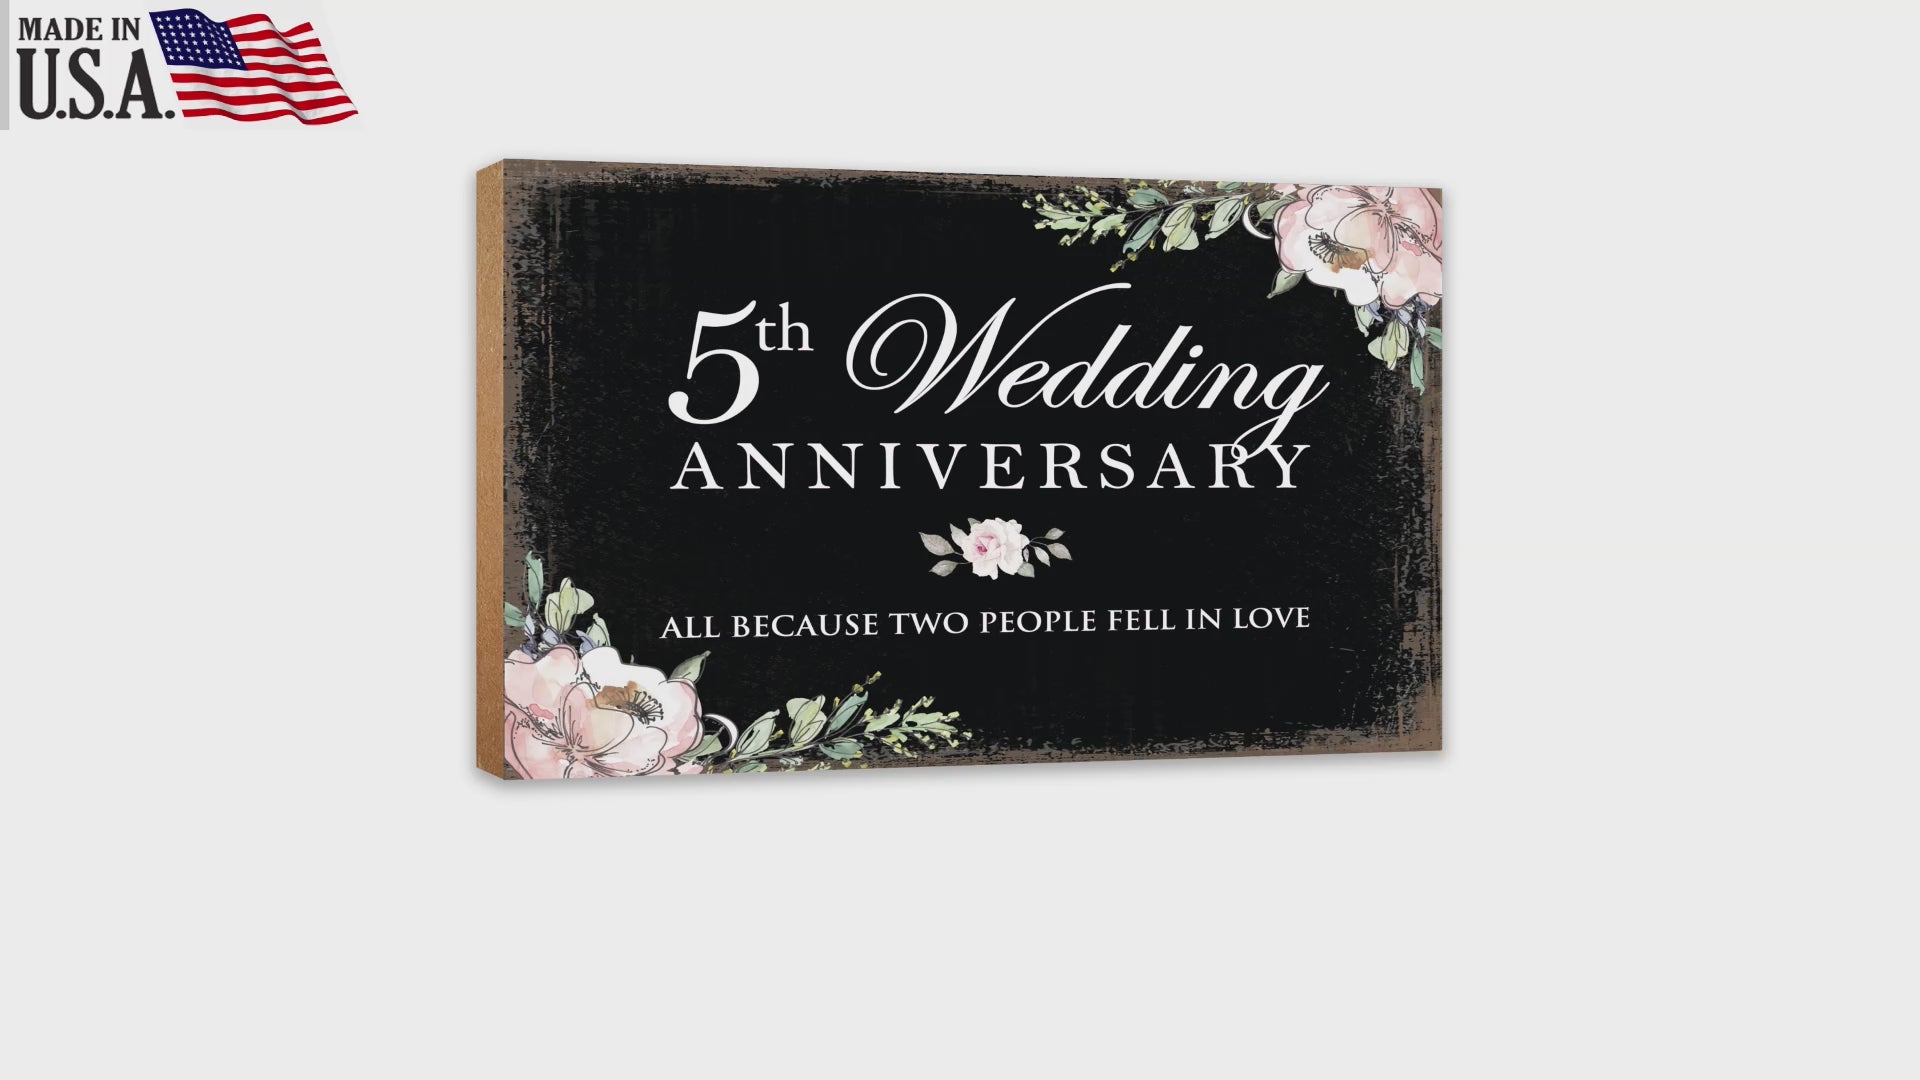 5th Wedding Anniversary Unique Shelf Decor and Tabletop Signs Gifts for Couples - Fell In Love